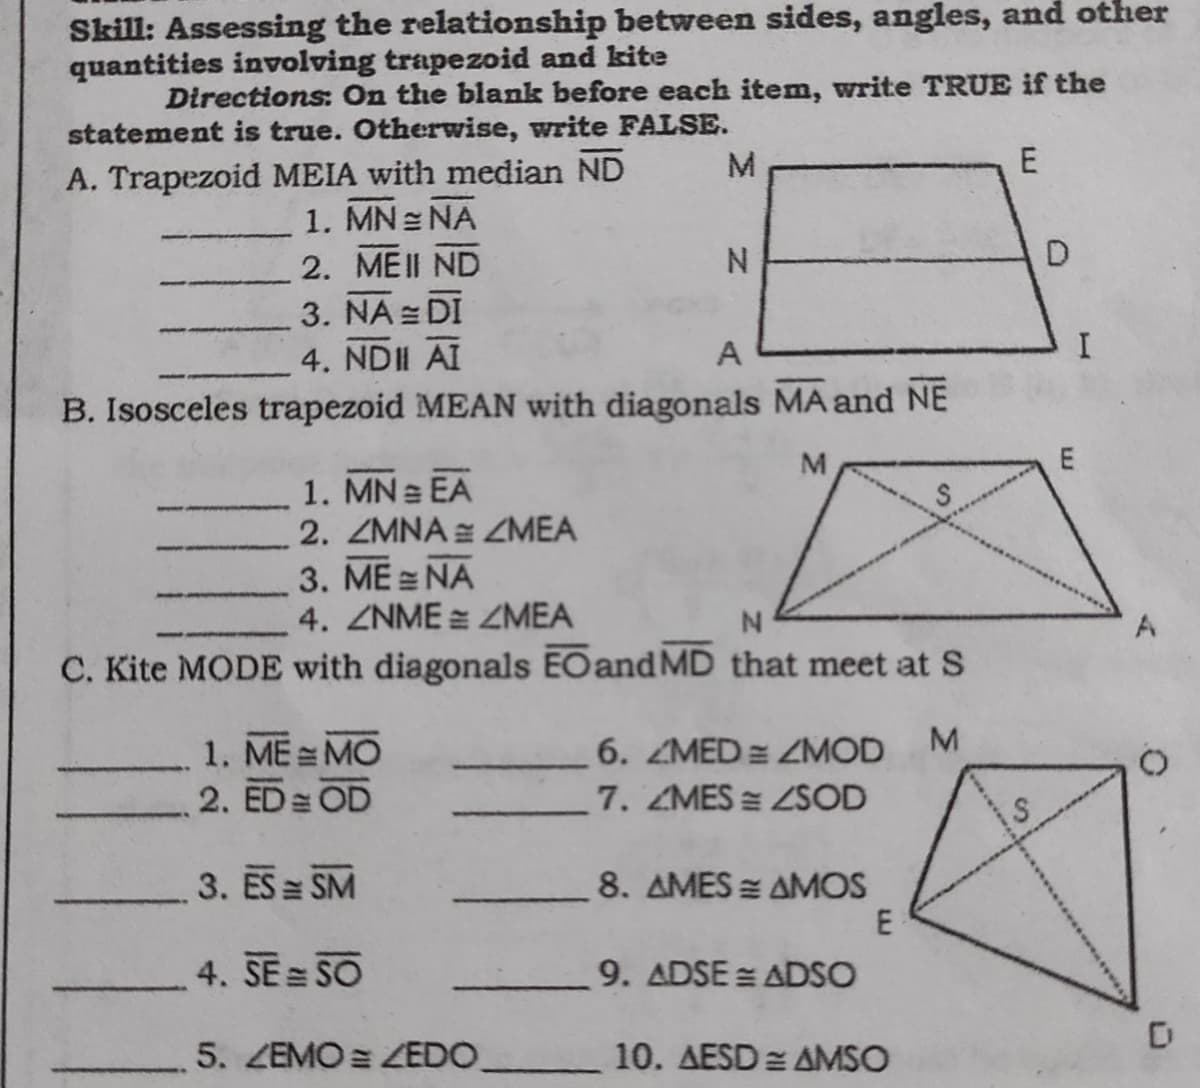 Skill: Assessing the relationship between sides, angles, and other
quantities involving trapezoid and kite
Directions: On the blank before each item, write TRUE if the
statement is true. Otherwise, write FALSE.
E
A. Trapezoid MEIA with median ND
1. MN NA
2. MEII ND
N.
3. NA = DI
4. NDII AI
A
B. Isosceles trapezoid MEAN with diagonals MA and NE
1. MN EA
2. ZMNA ZMEA
3. ME = NA
4. ZNME = ZMEA
C. Kite MODE with diagonals EOand MD that meet at S
1. ME MO
6. ZMED= ZMOD
2. ED OD
7. ZMES ZSOD
3. ES SM
8. AMES = AMOS
E
4. SE SO
9. ADSE = ADSO
5. ZEMO = ZEDO_
10. AESD = AMSO
